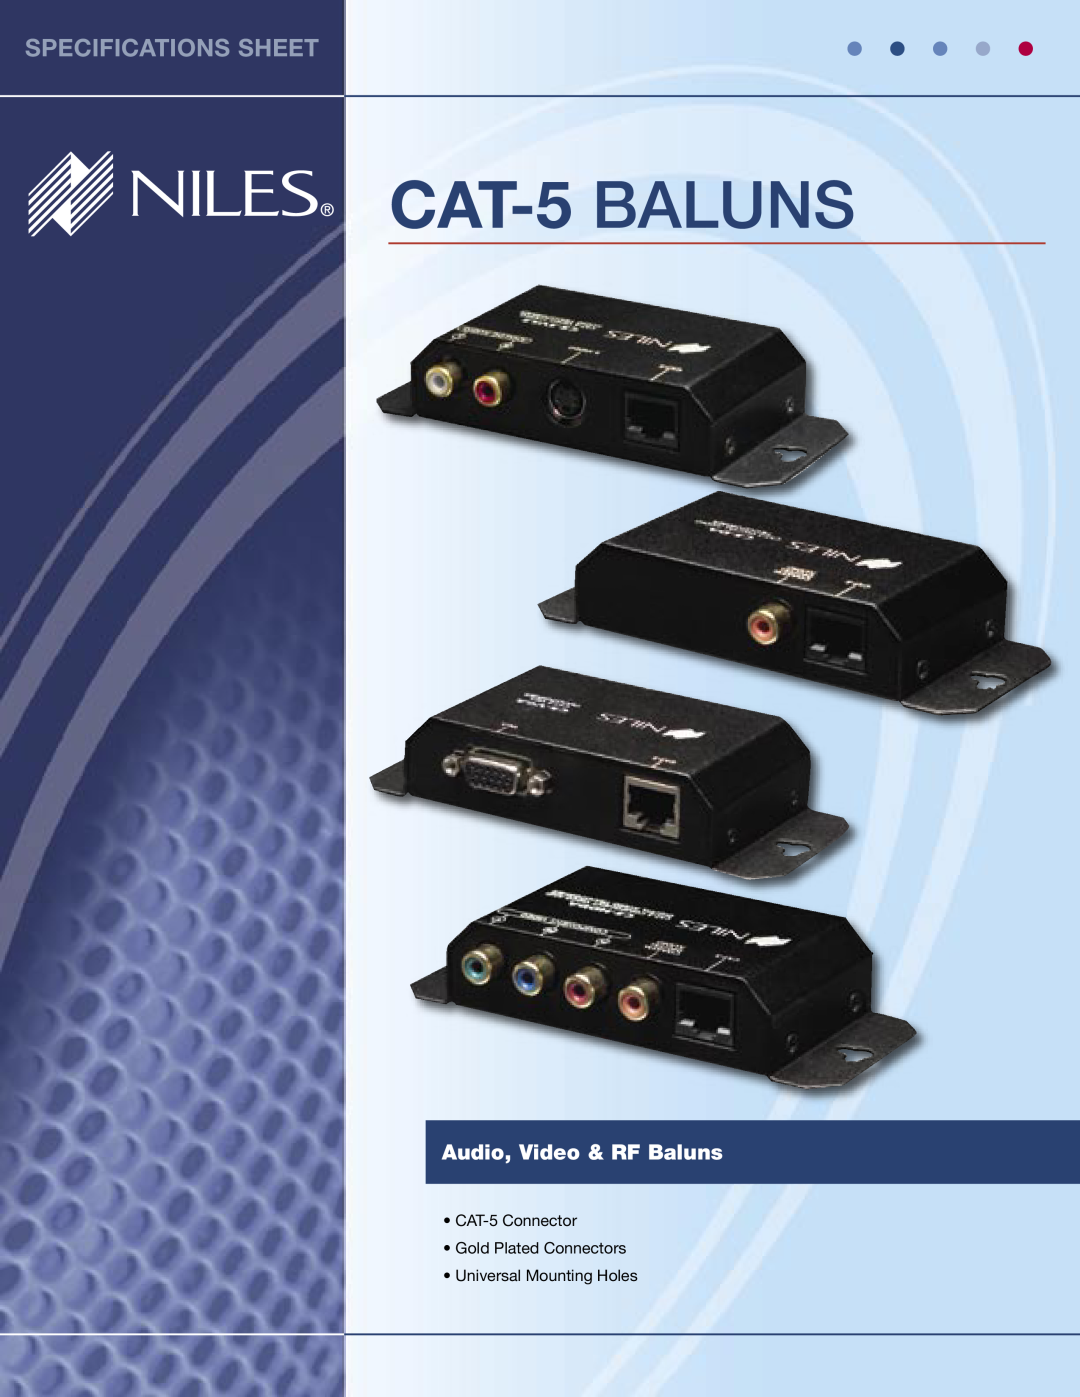 Niles Audio 650-005 specifications CAT-5 BALUNS, Specifications Sheet, Audio, Video & RF Baluns 